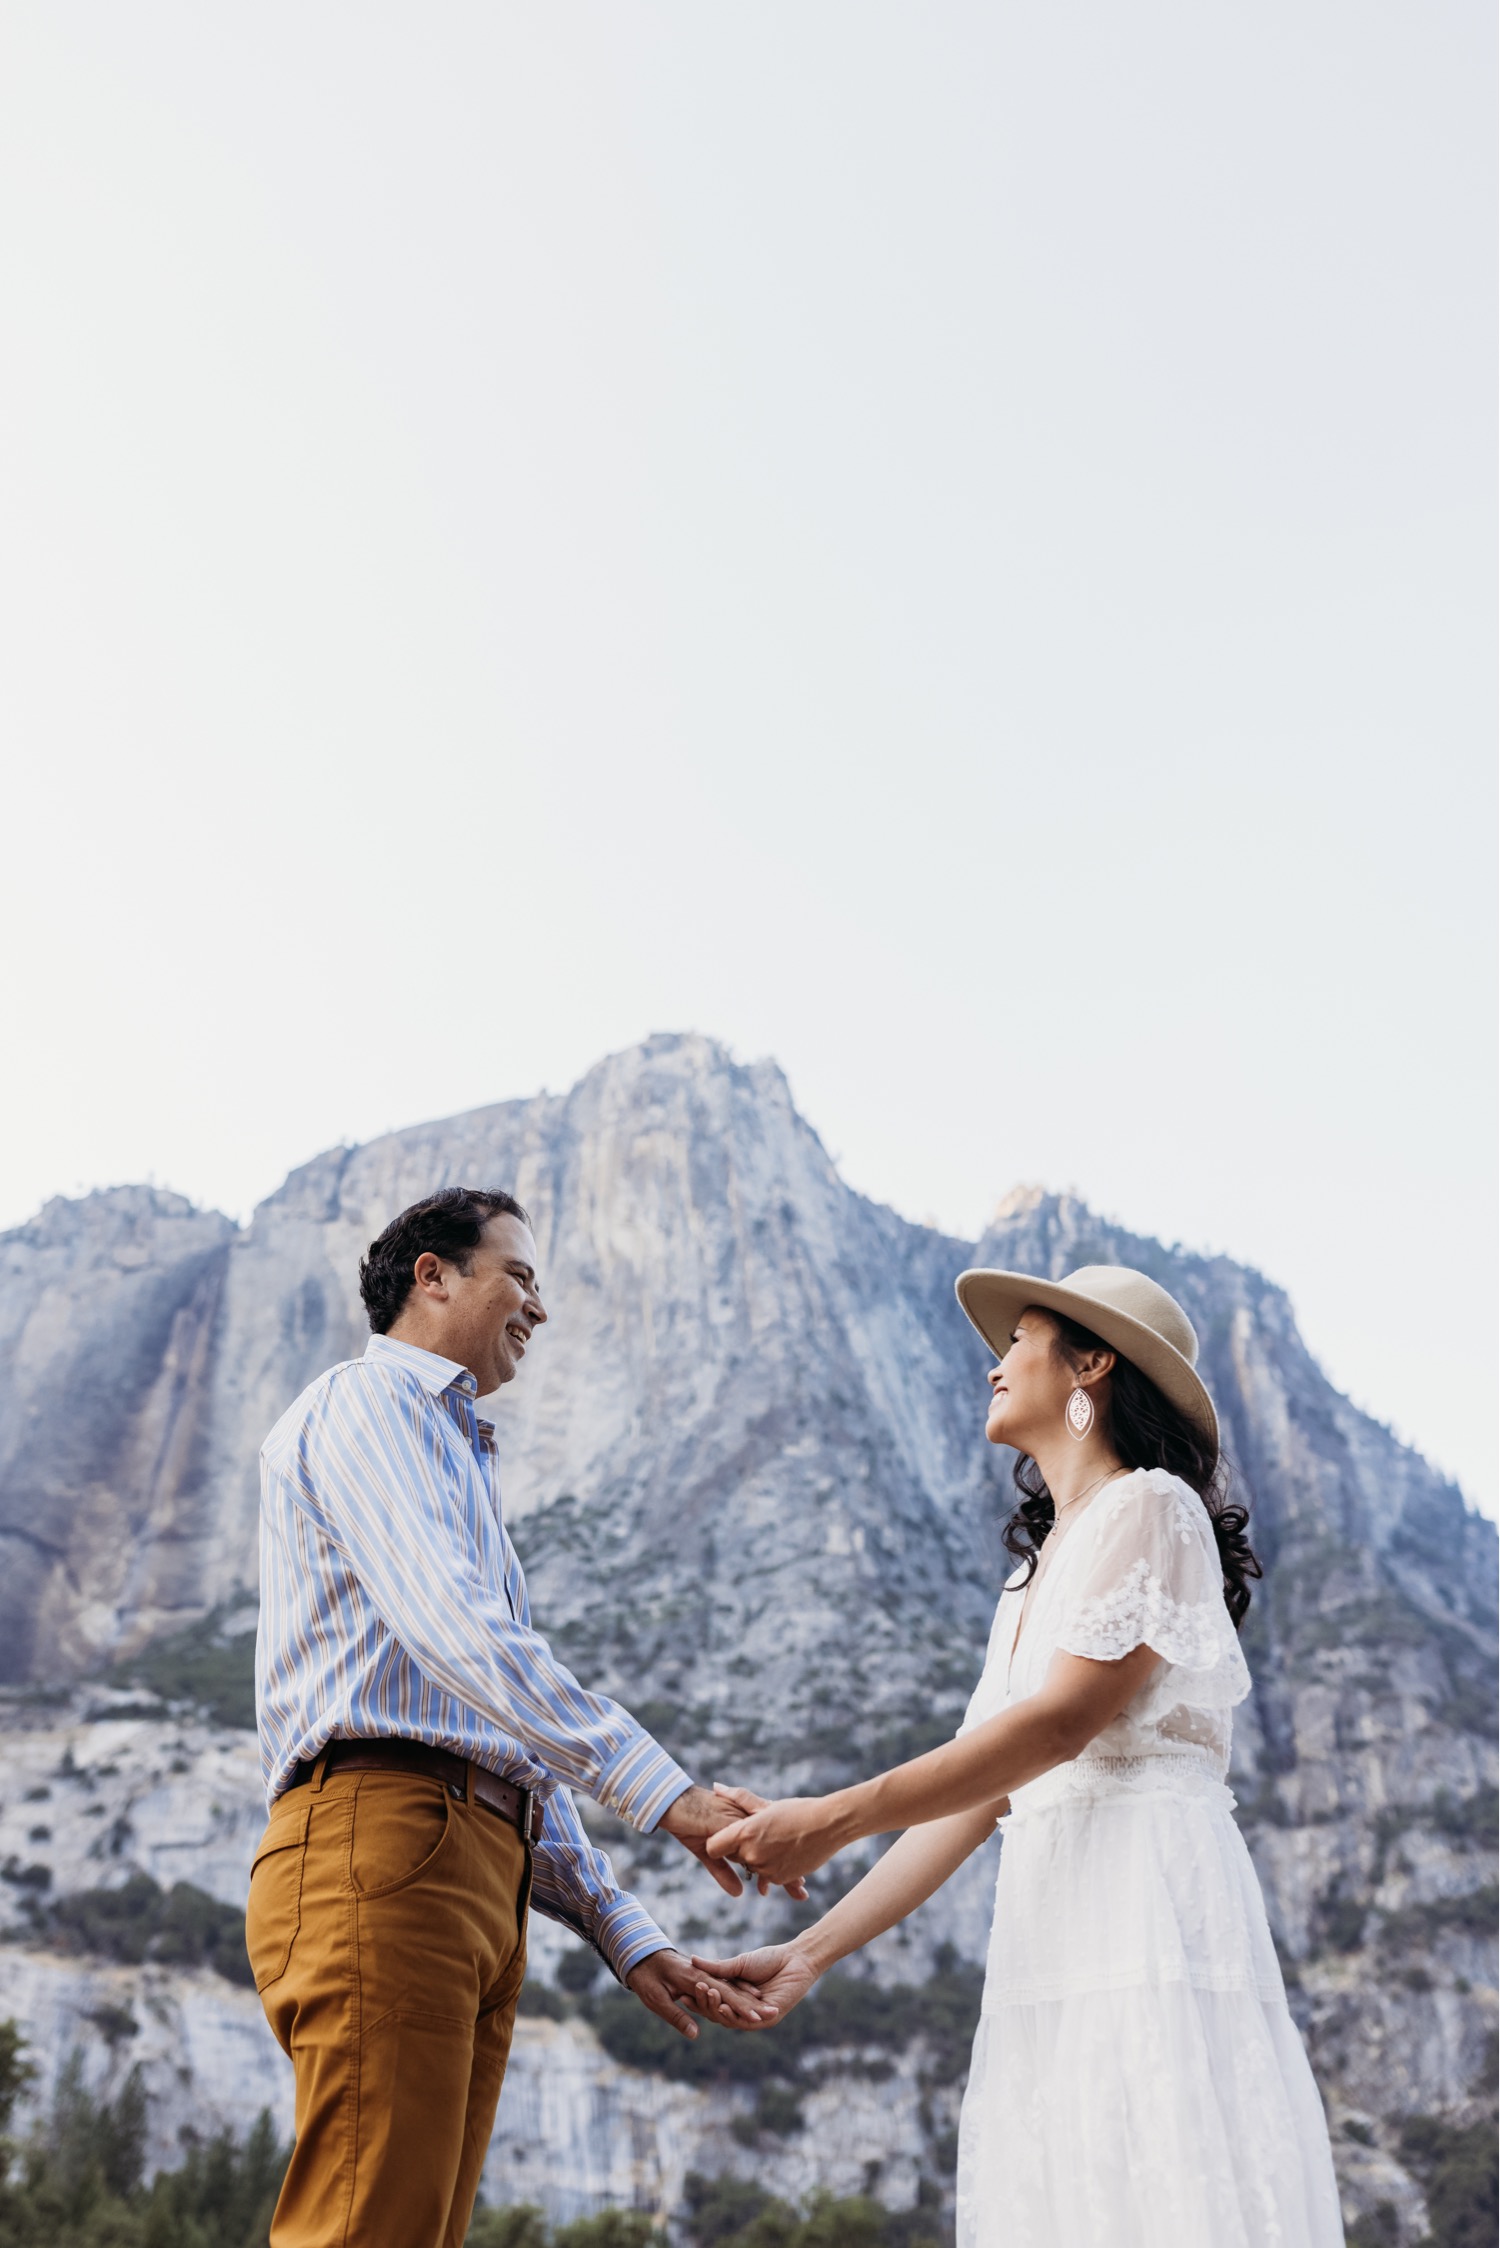 Couple smiling and holding hands on their couples engagement photoshoot in Yosemite National Park